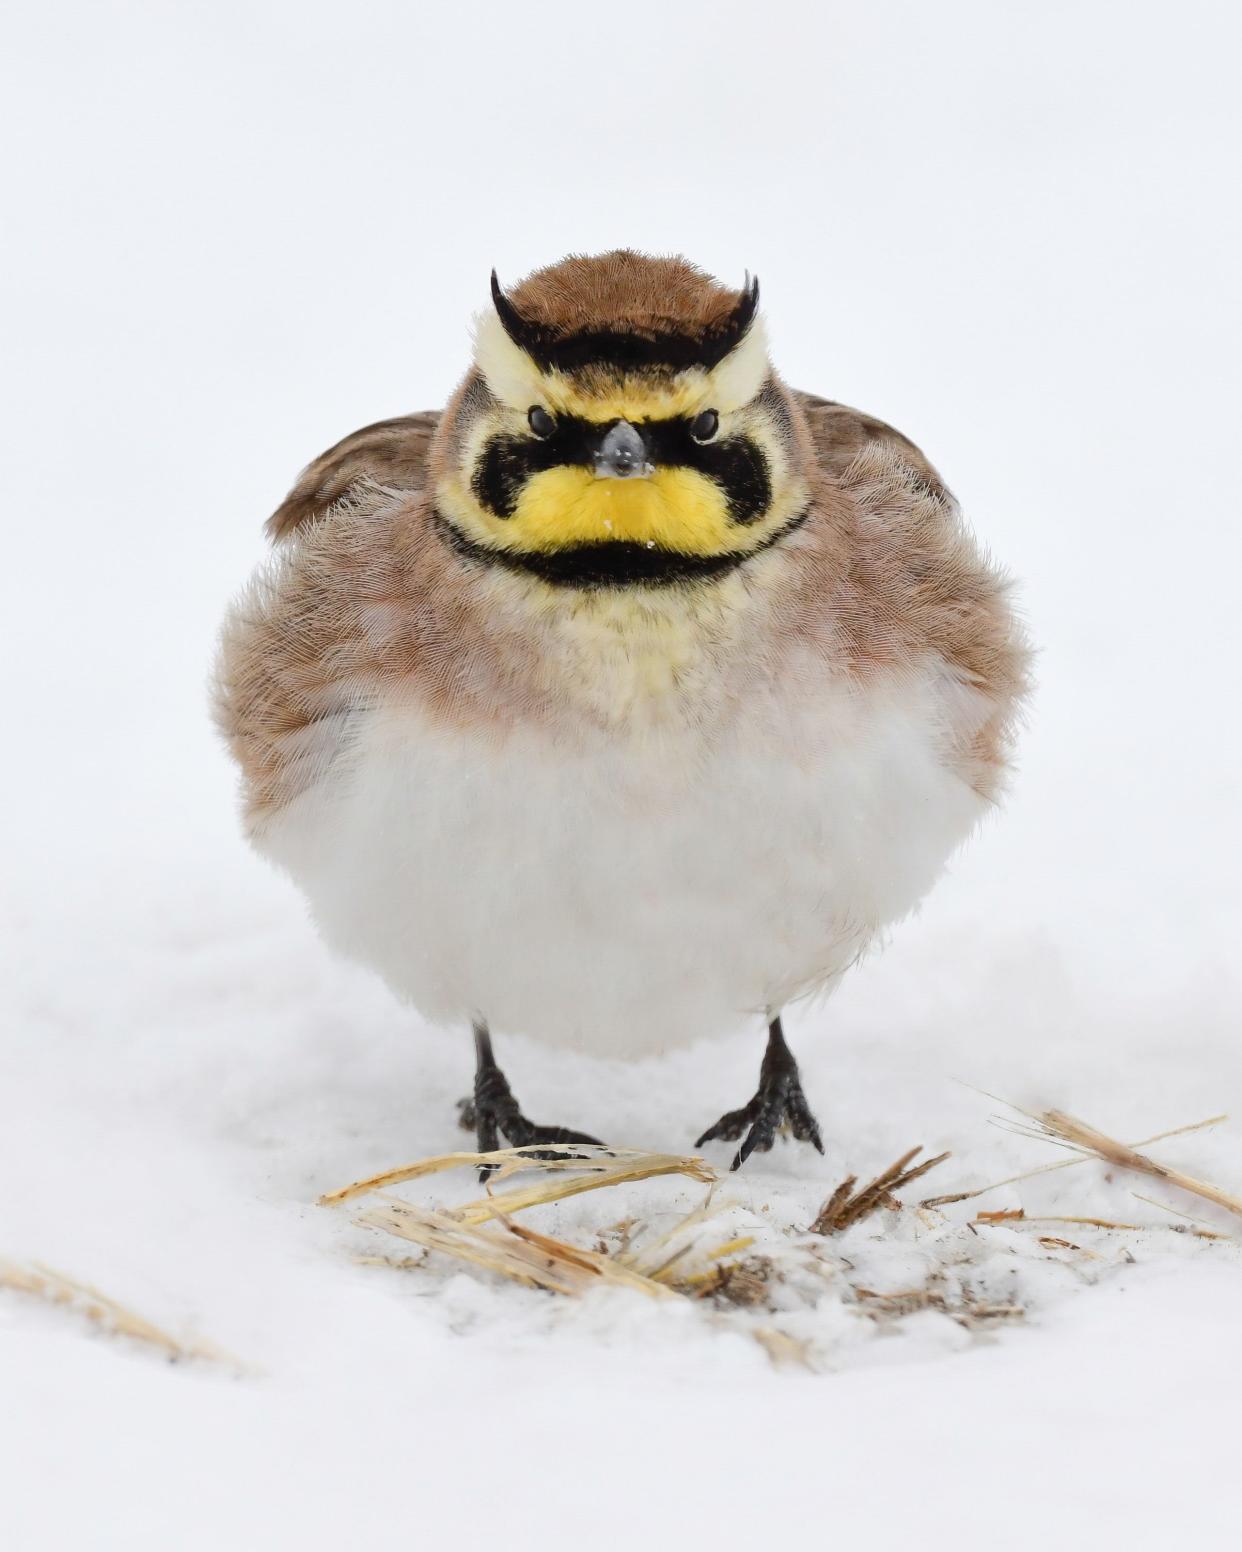 The horned lark competes in Wisconsin's Fat Bird Week.